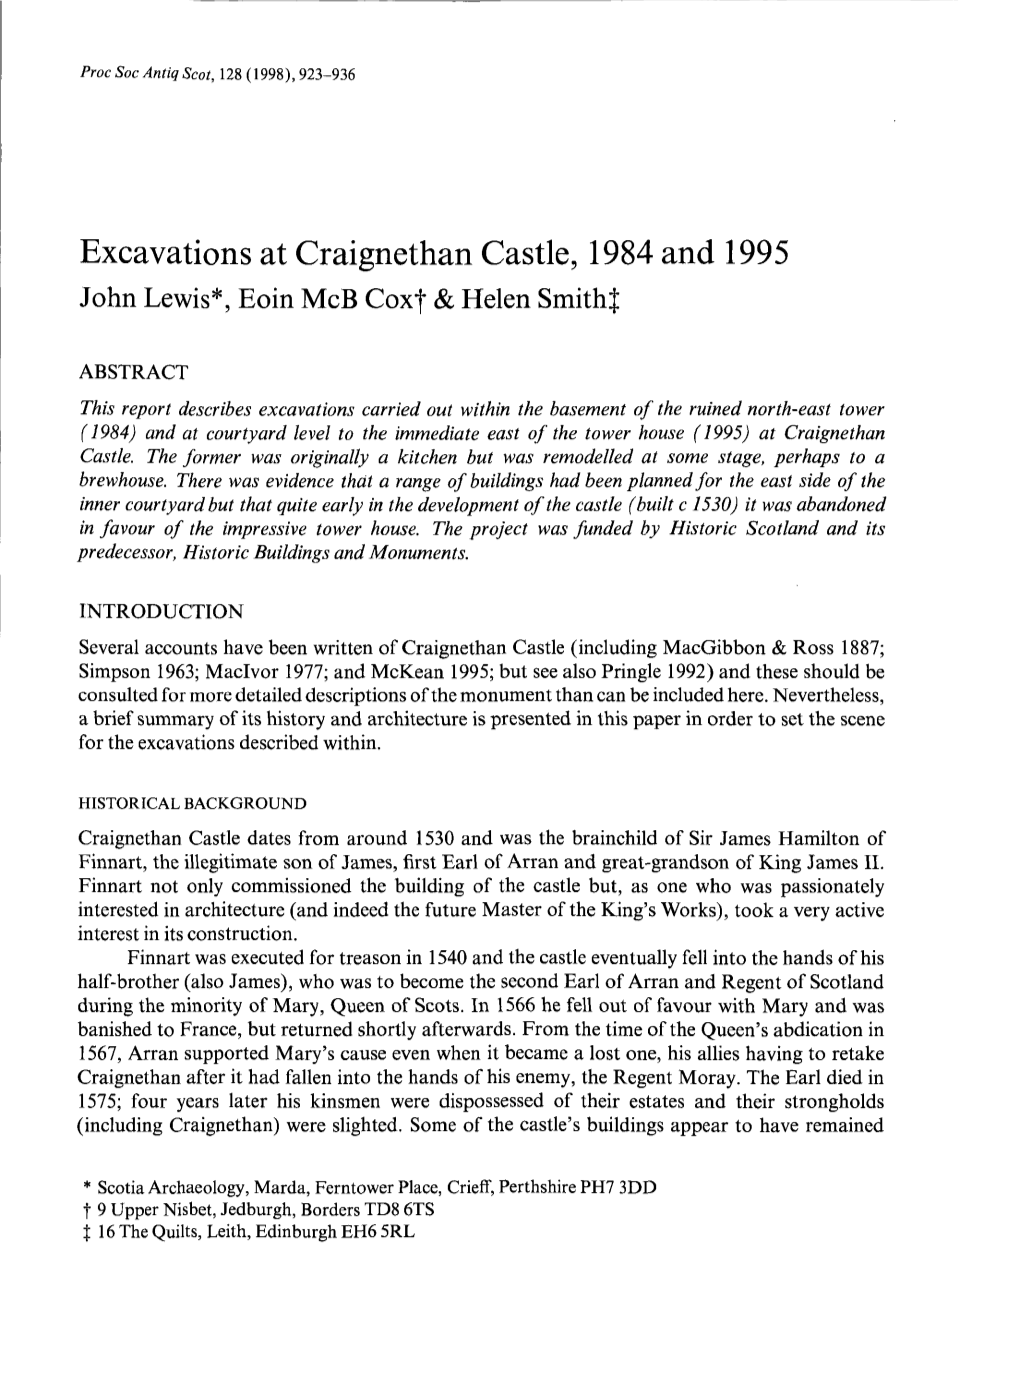 Excavations at Craignethan Castle, 1984 and 1995 John Lewis*, Eoin Mcb Cox| & Helen Smith}